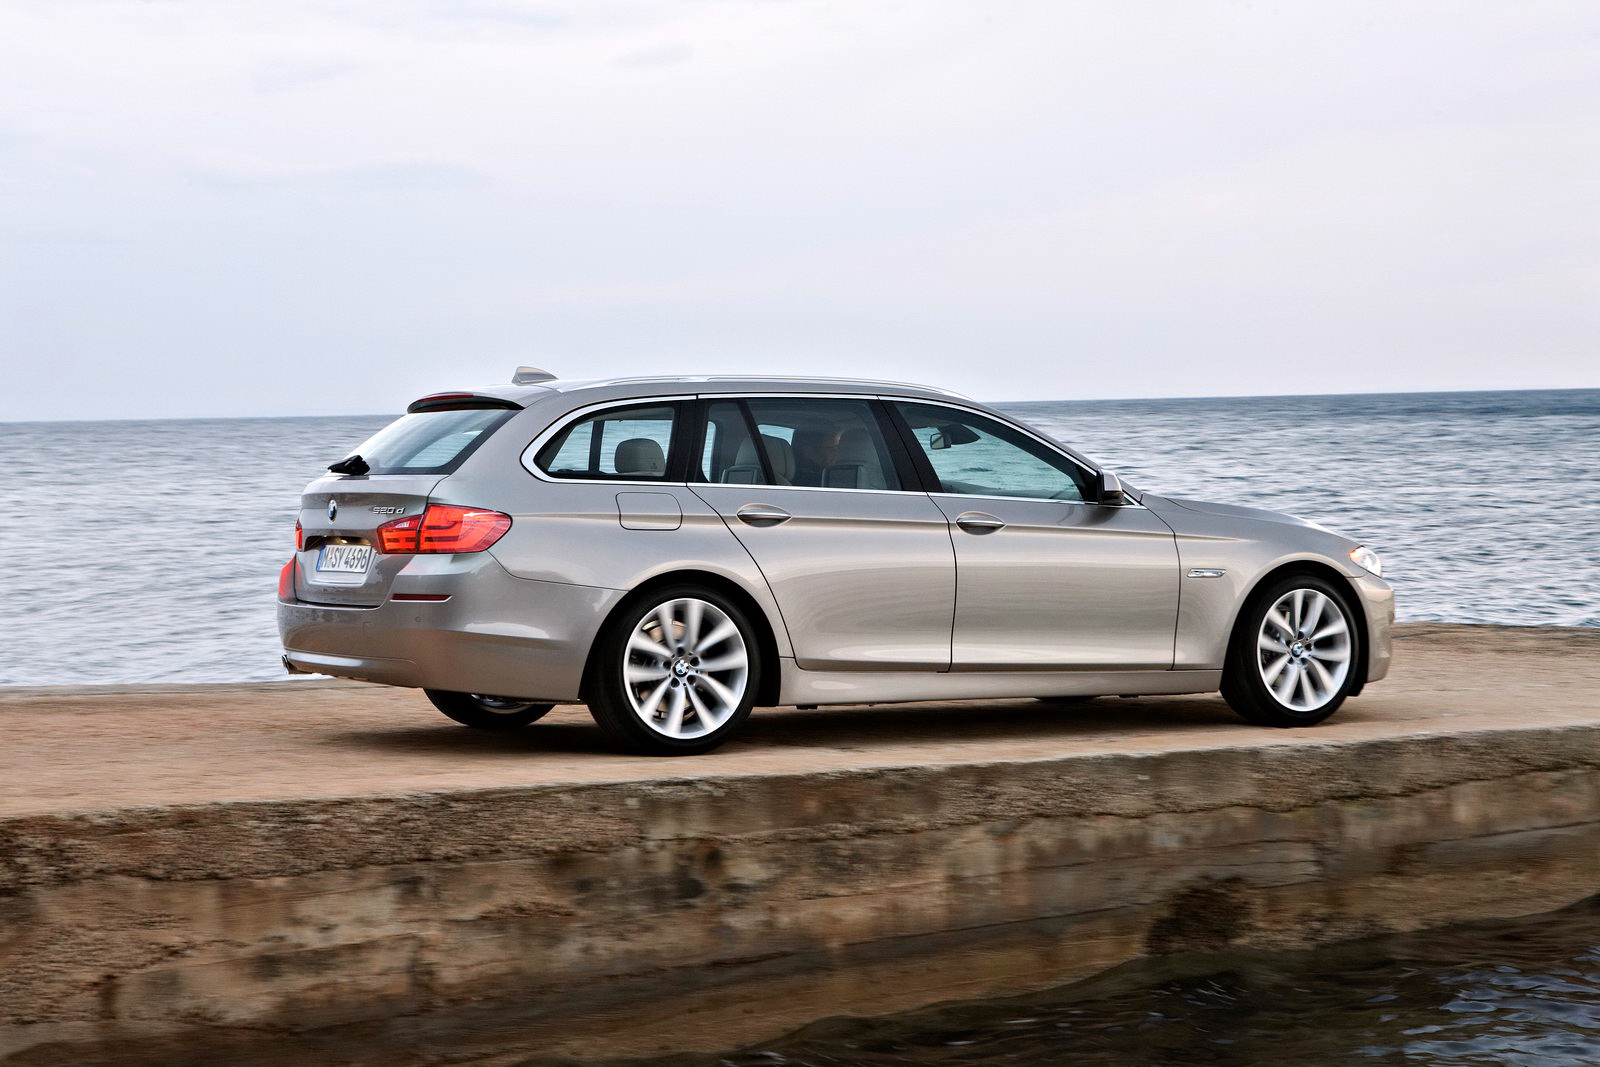 New BMW 5 Series Touring (Wagon) not Coming to North America